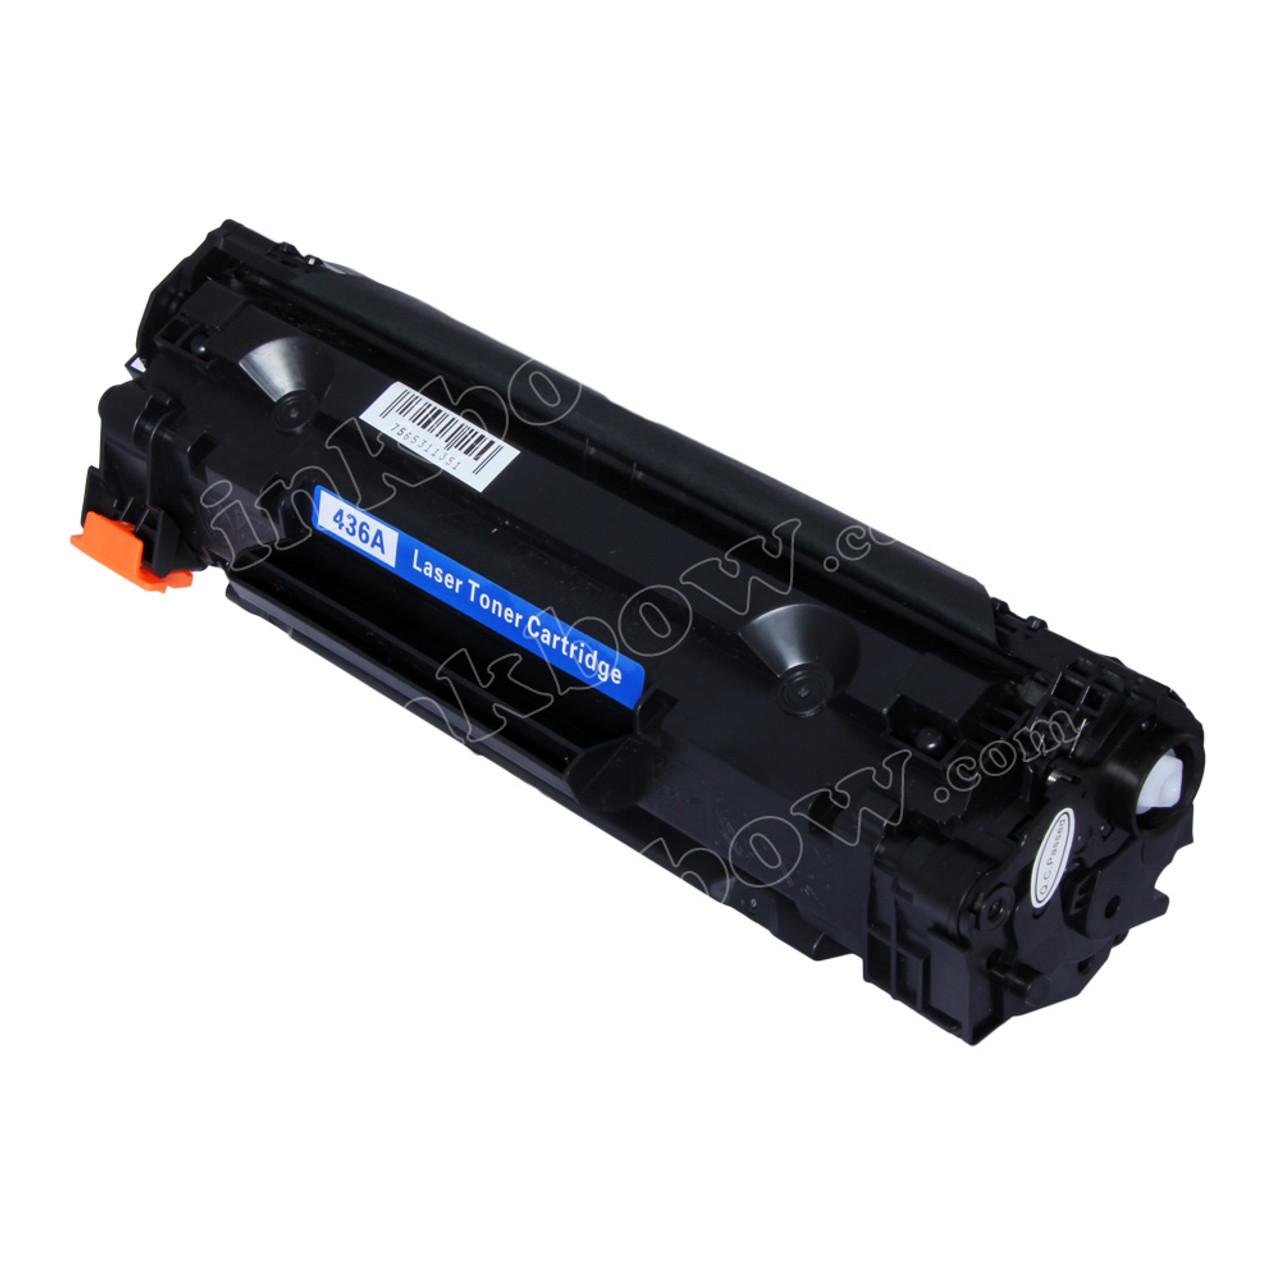 Compatible HP 36A Black Laser Toner Cartridge, CB436A Price in Singapore